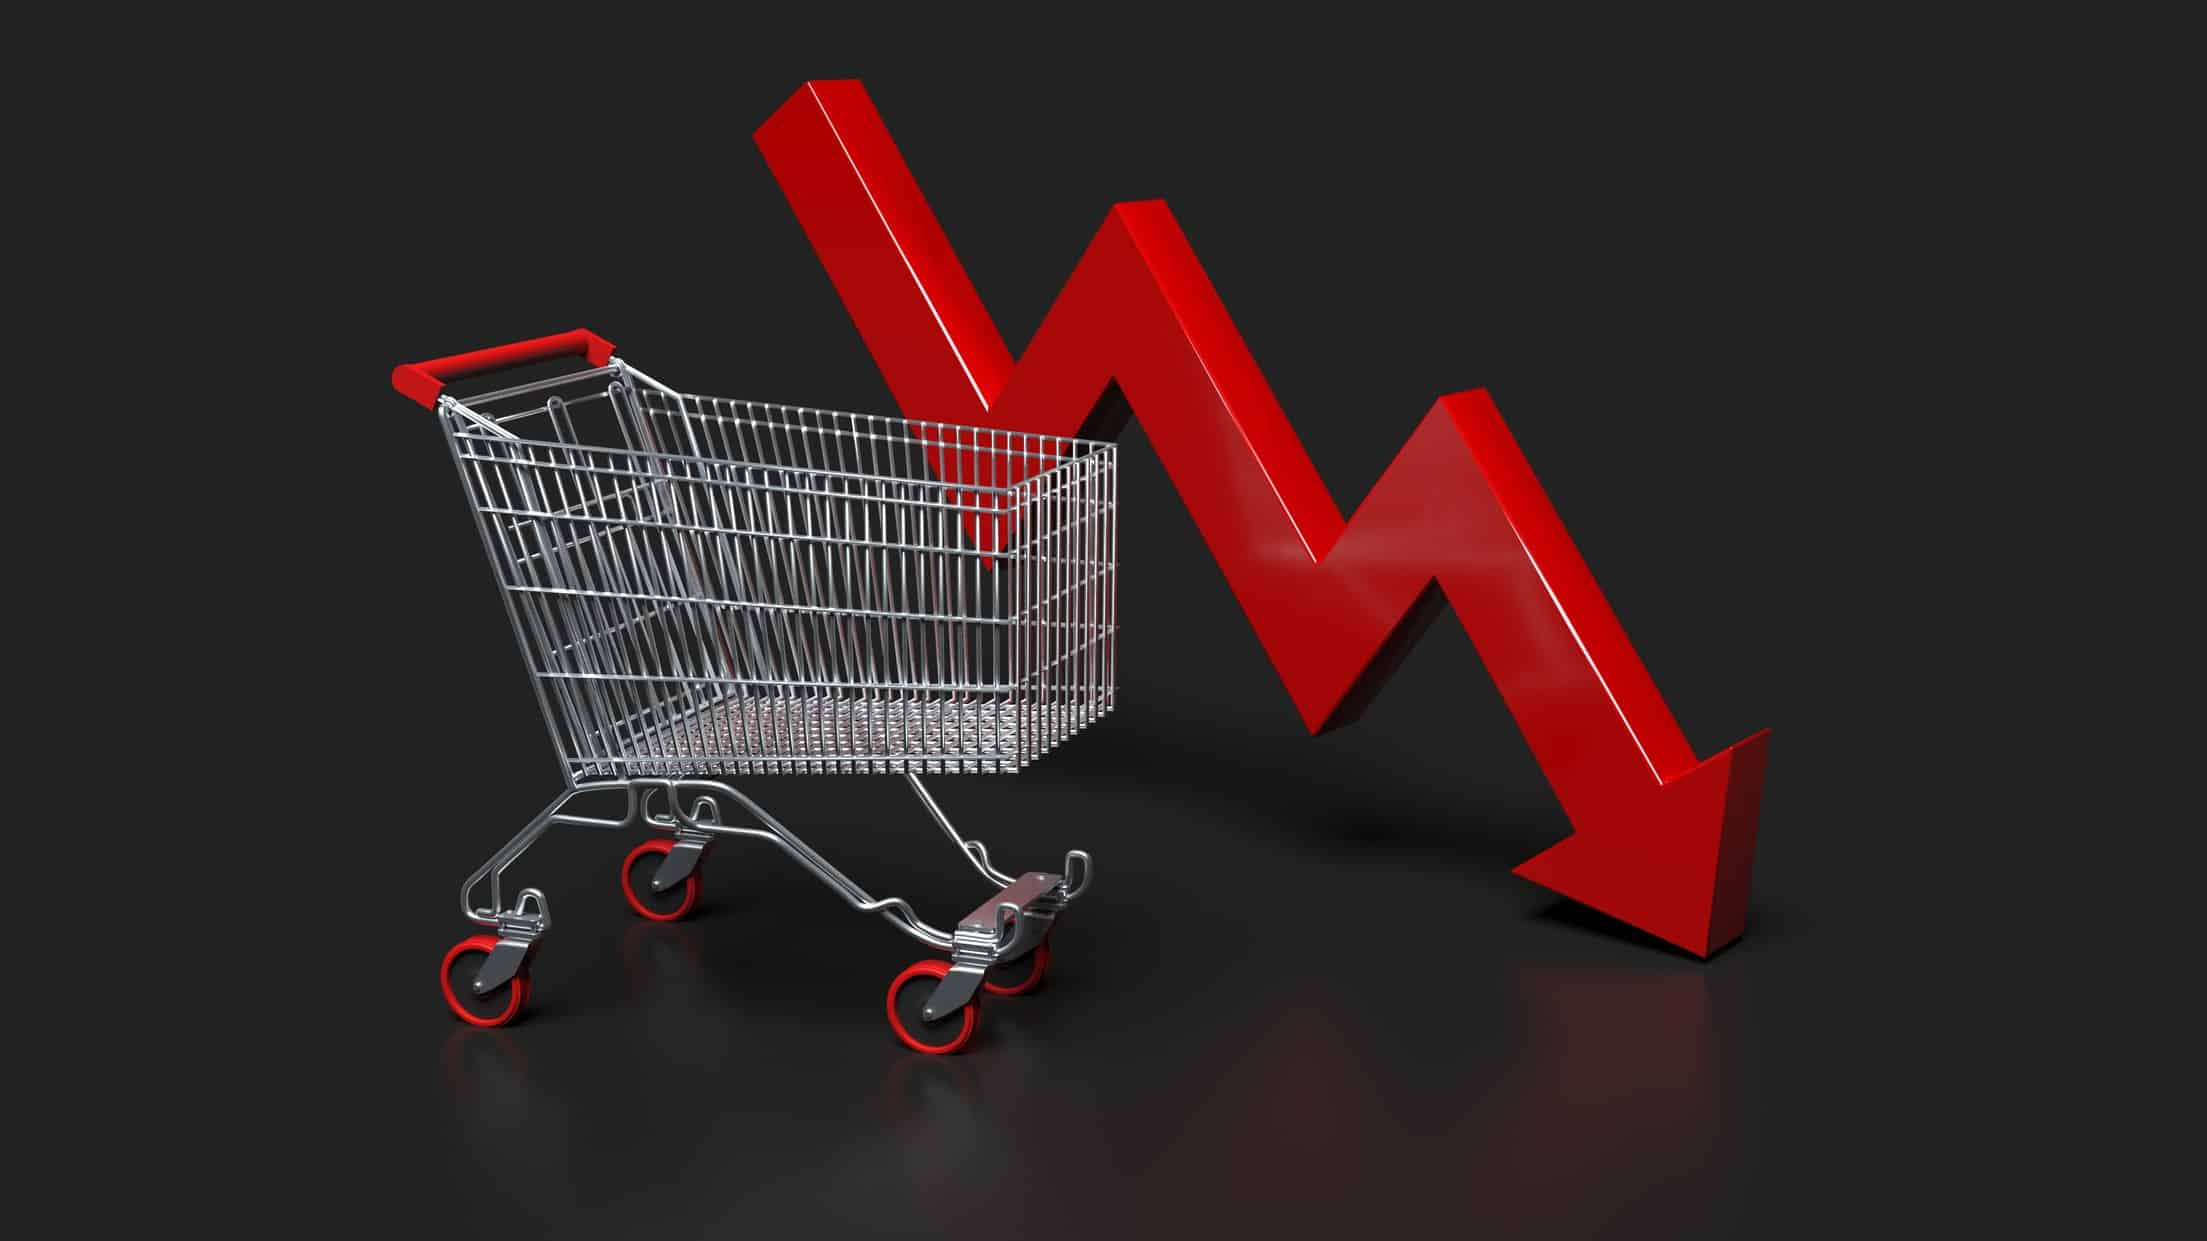 Supermarket trolley with a red arrow pointing downwards, symbolising a falling share price.